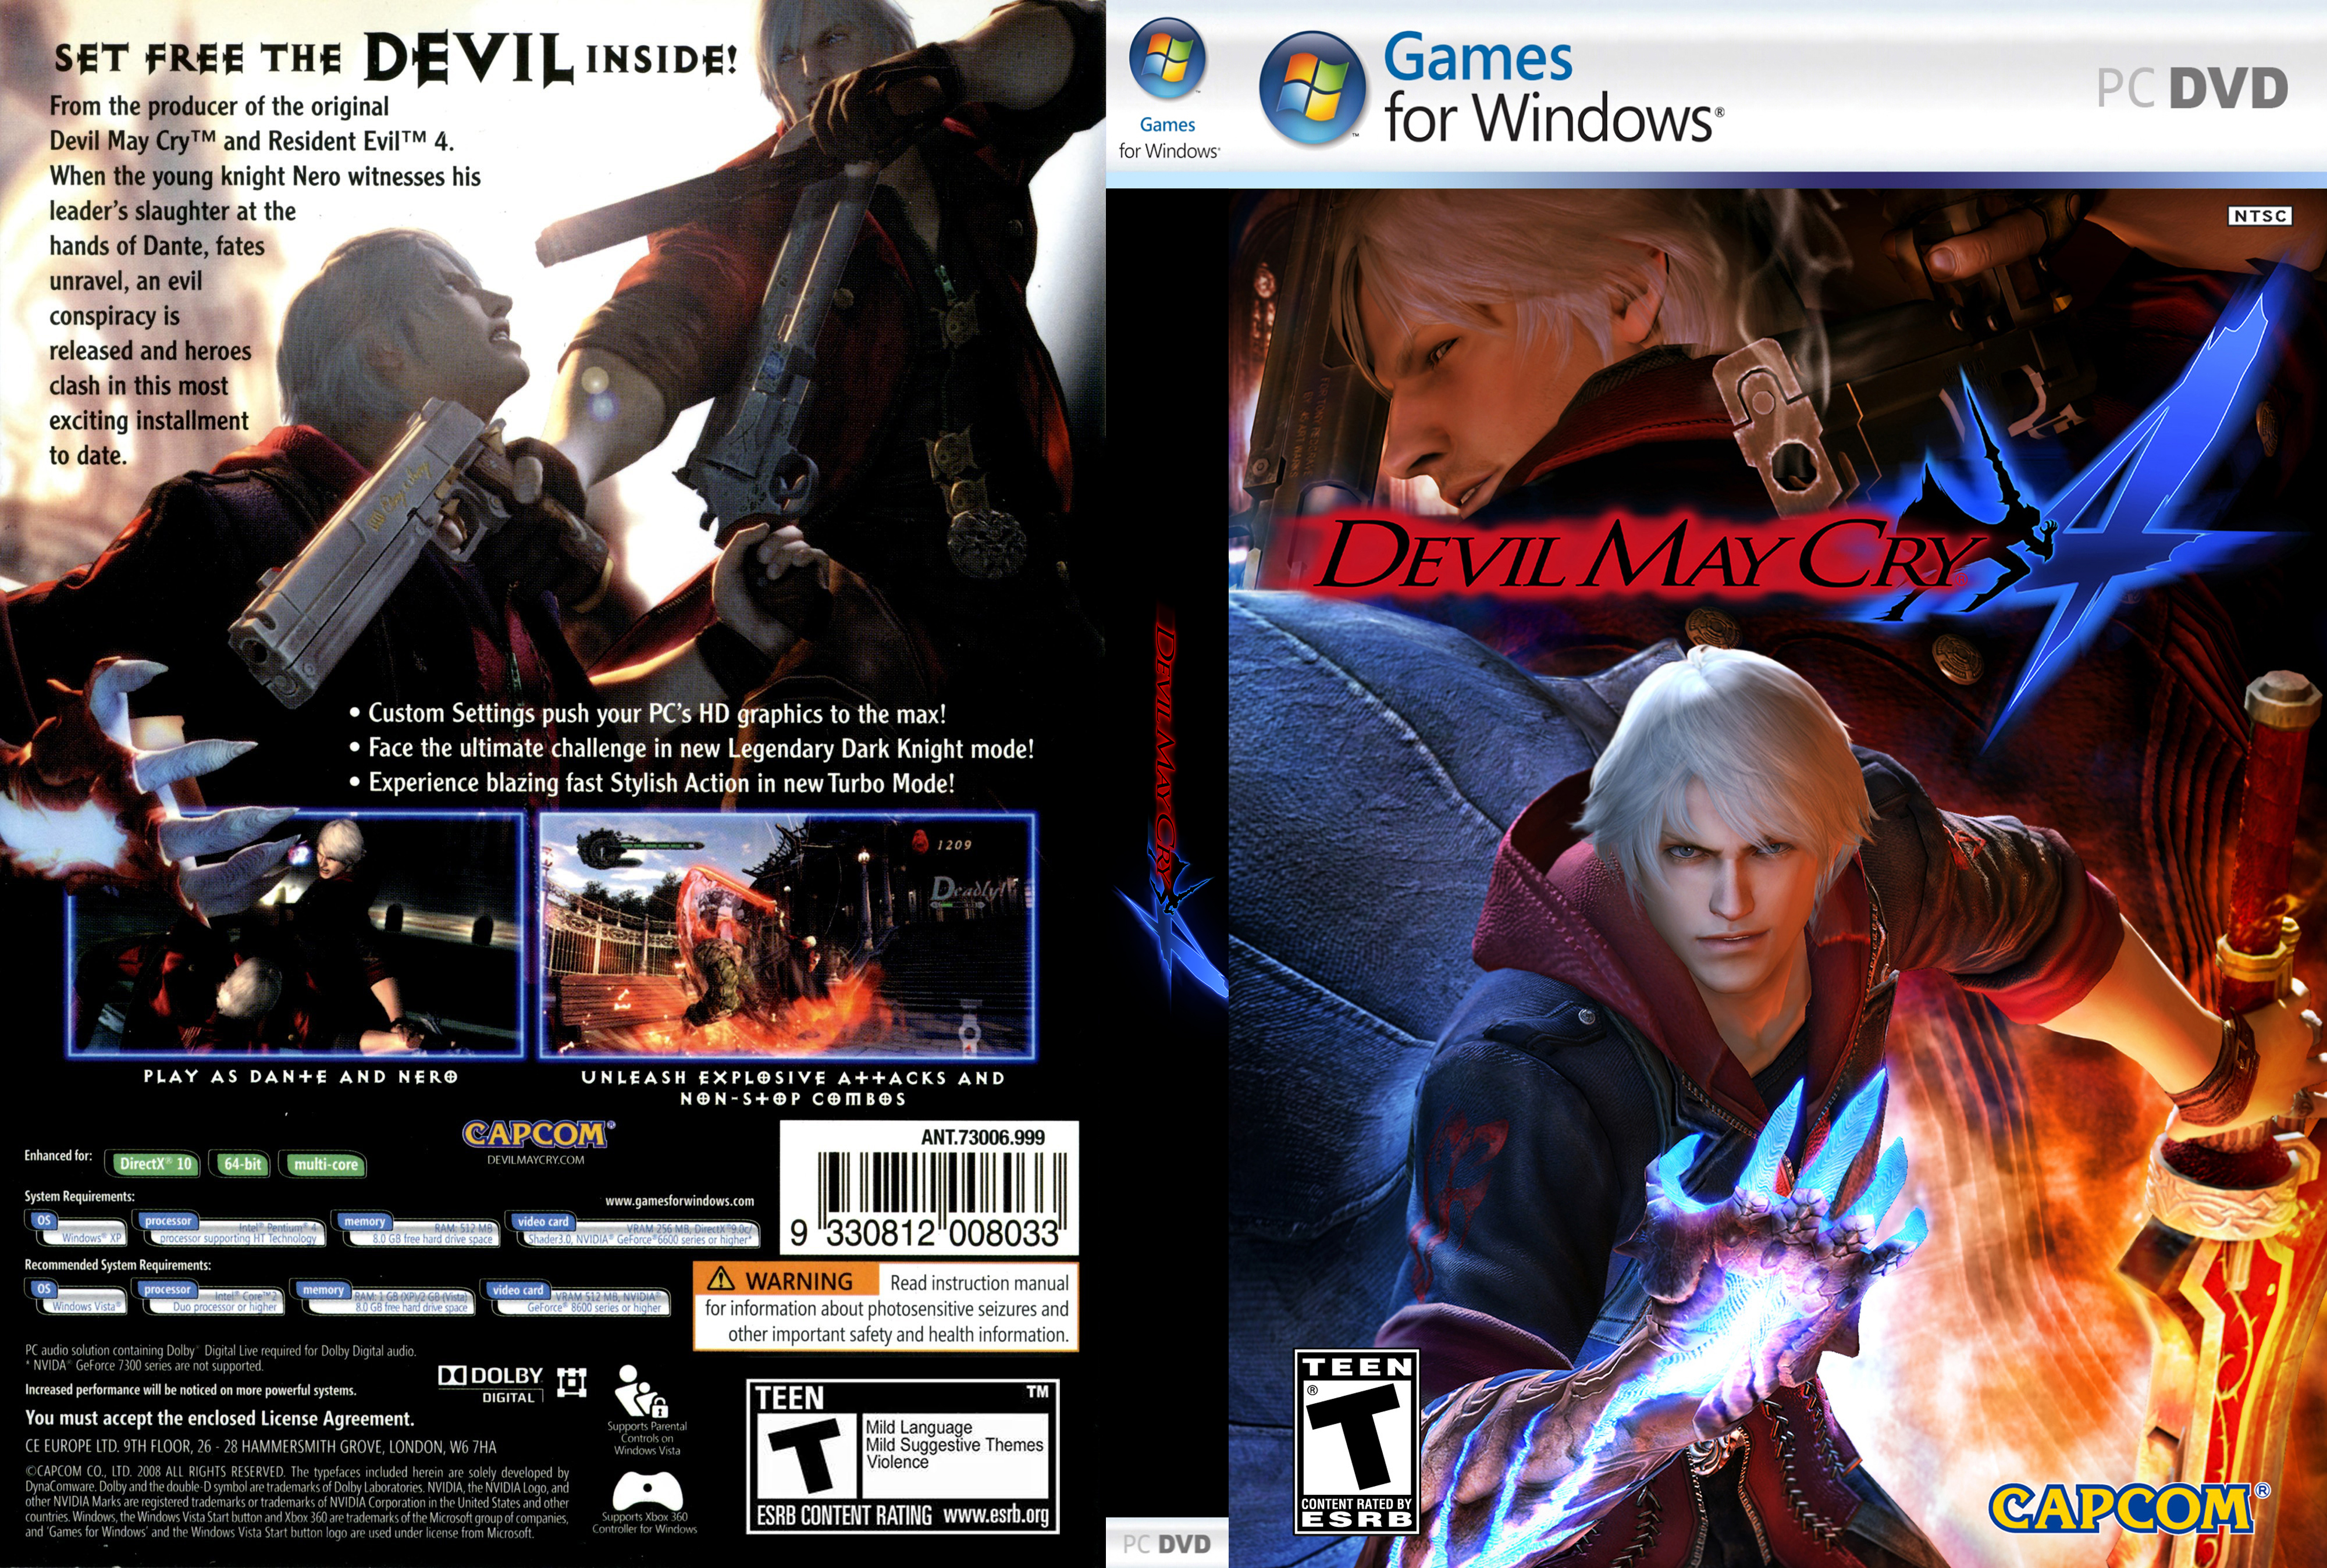 Nero Fight DMC4 Wallpapers Images | Crazy Gallery